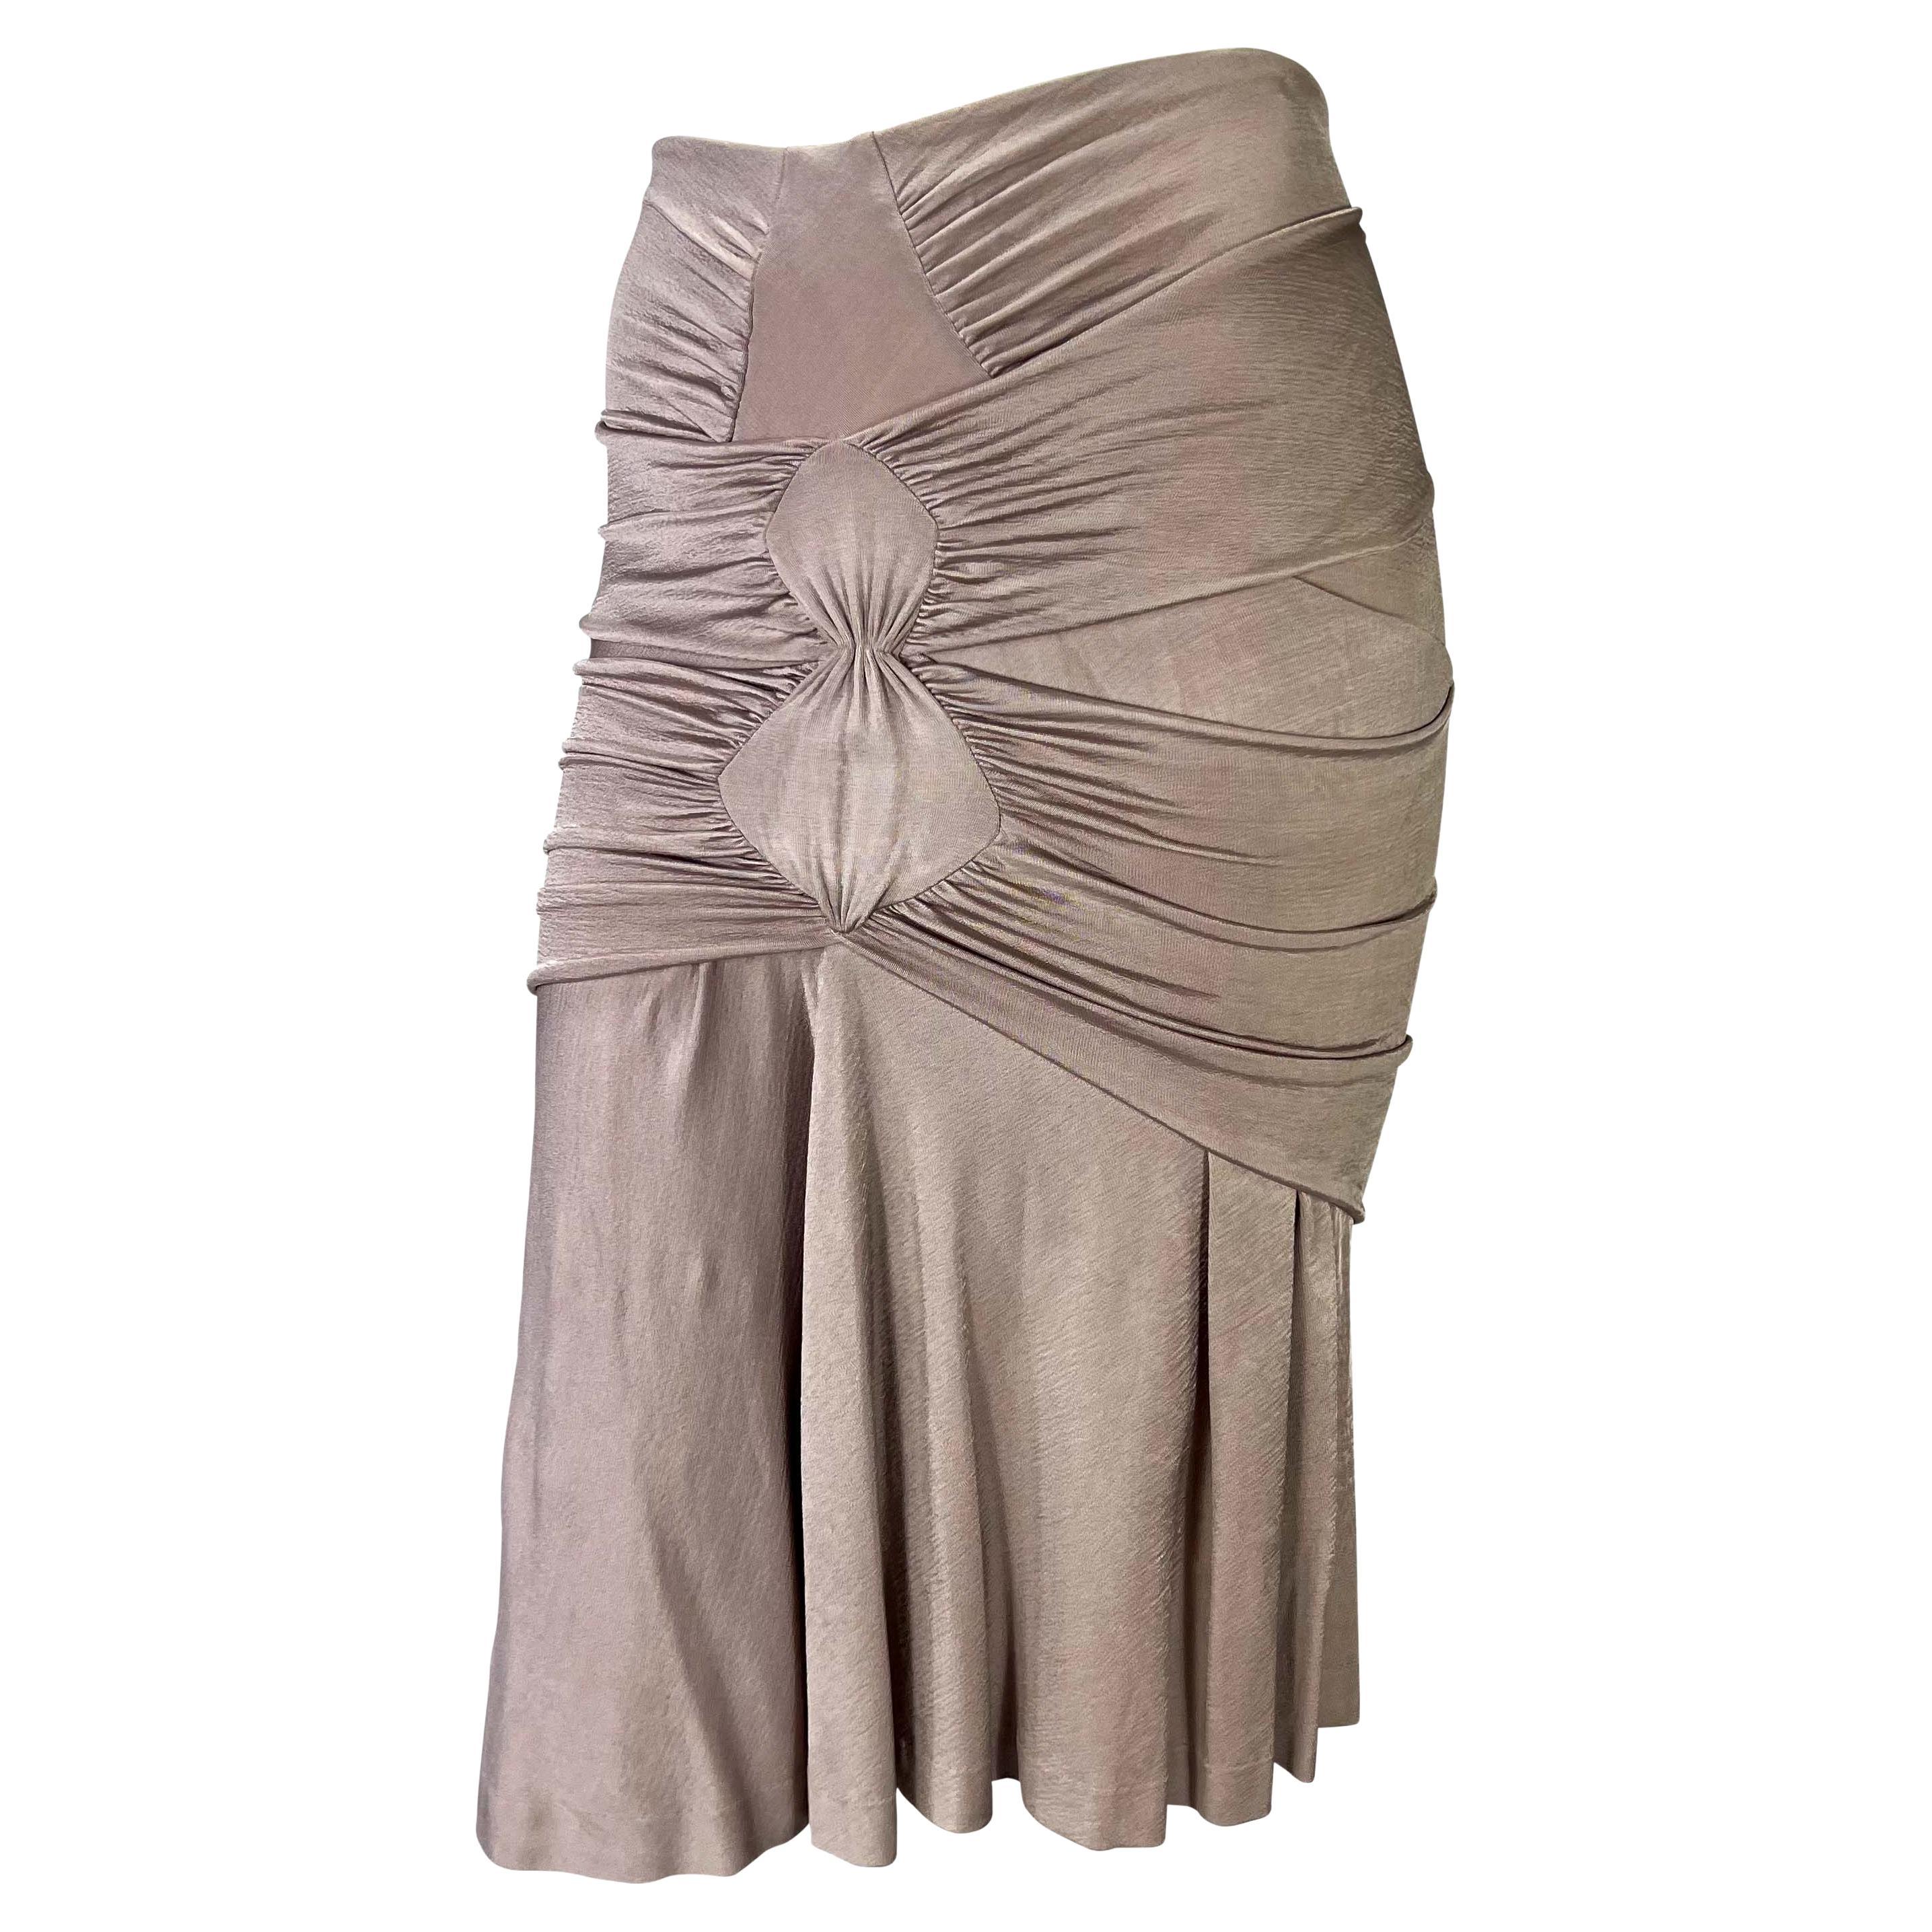 S/S 2003 Yves Saint Laurent by Tom Ford Runway Dusty Lavender Ruched Skirt For Sale